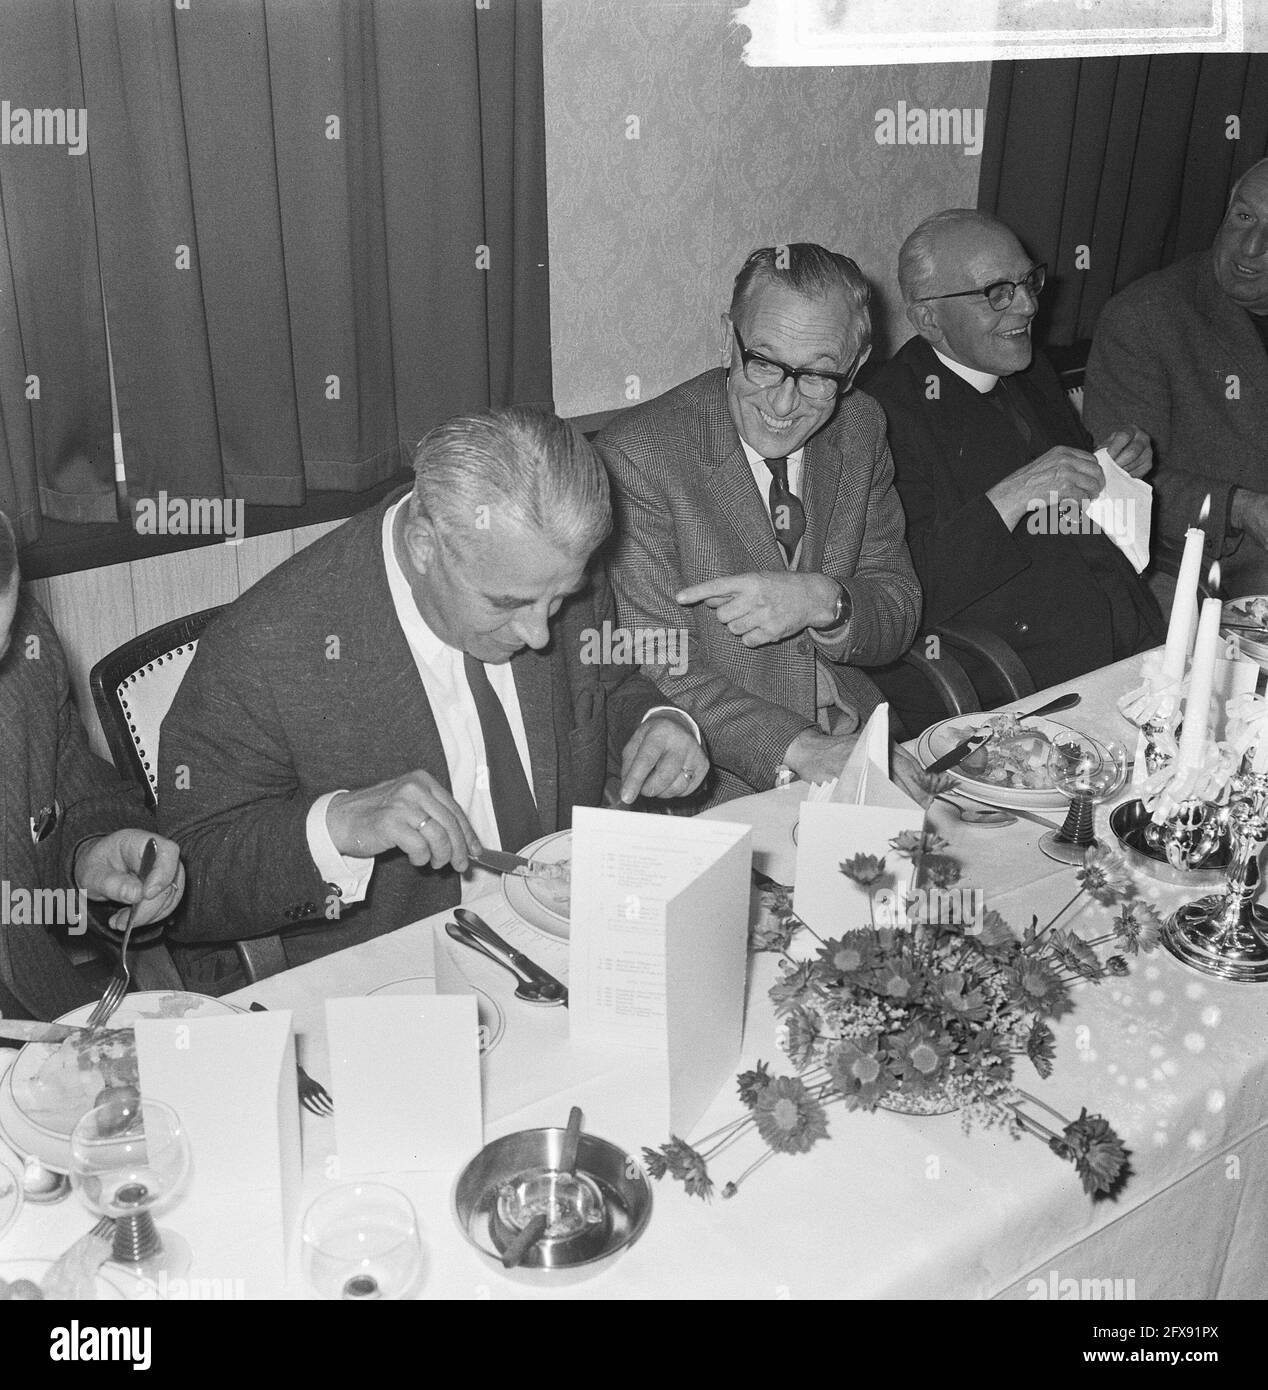 Meeting of the Association Club of the Hundred (Fish); laughing gentlemen at dinner, December 16, 1965, laughter, meals, The Netherlands, 20th century press agency photo, news to remember, documentary, historic photography 1945-1990, visual stories, human history of the Twentieth Century, capturing moments in time Stock Photo